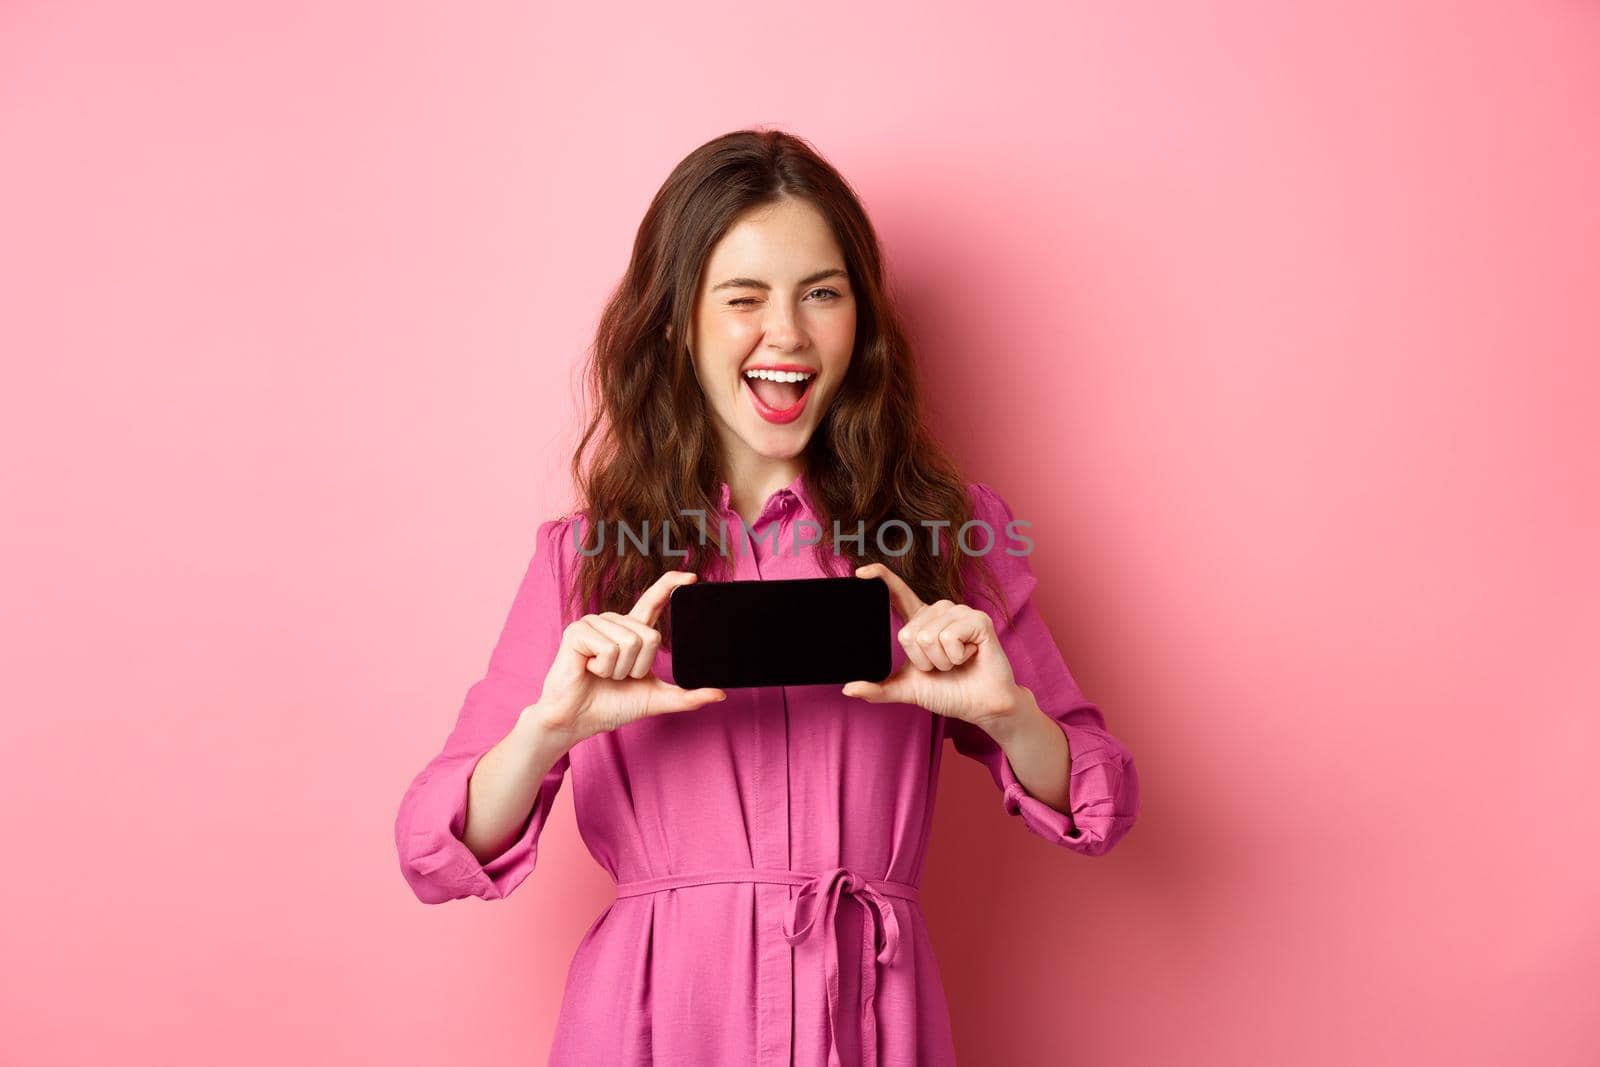 Technology concept. Cheerful lady in dress wink at you, smiling and showing mobile phone screen horizontally, standing over pink background.